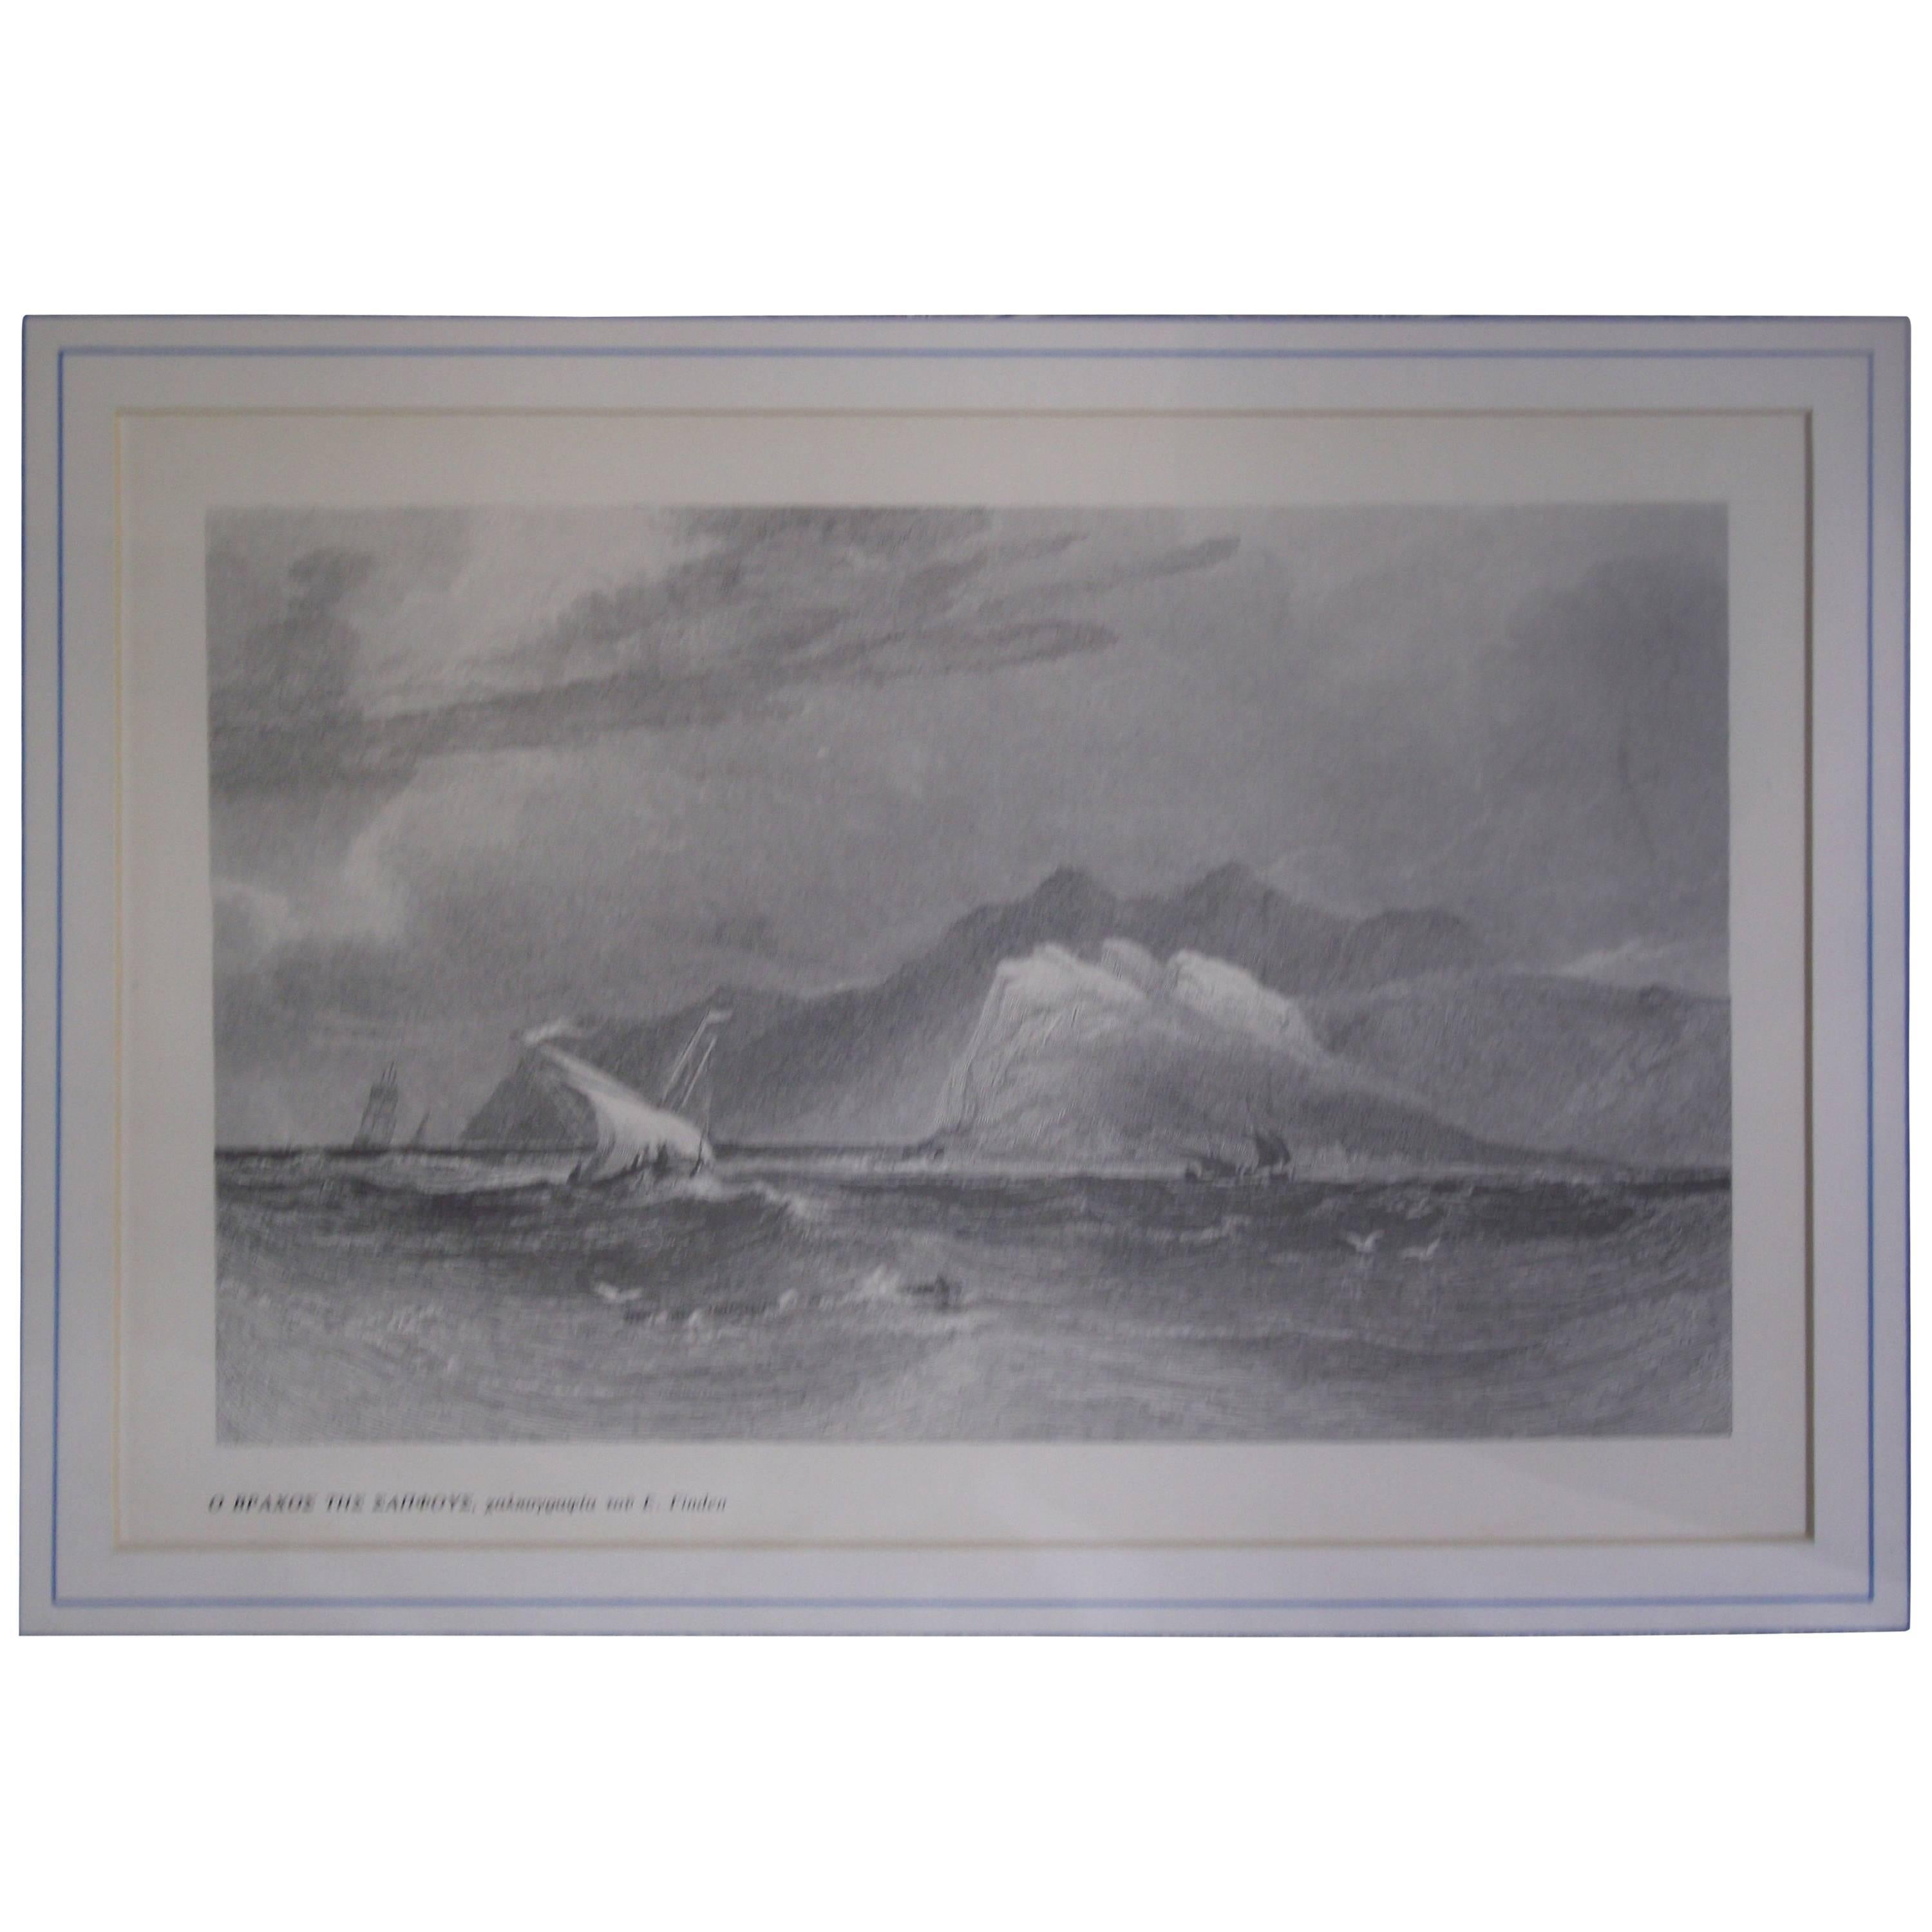 Beautiful Framed print by Edward Francis Finden. Still in the original mat and burl wood finished frame.

Edward Francis Finden (1791-1857) was a well-known English Engraver. His engravings were very popular in the mid-19th century.